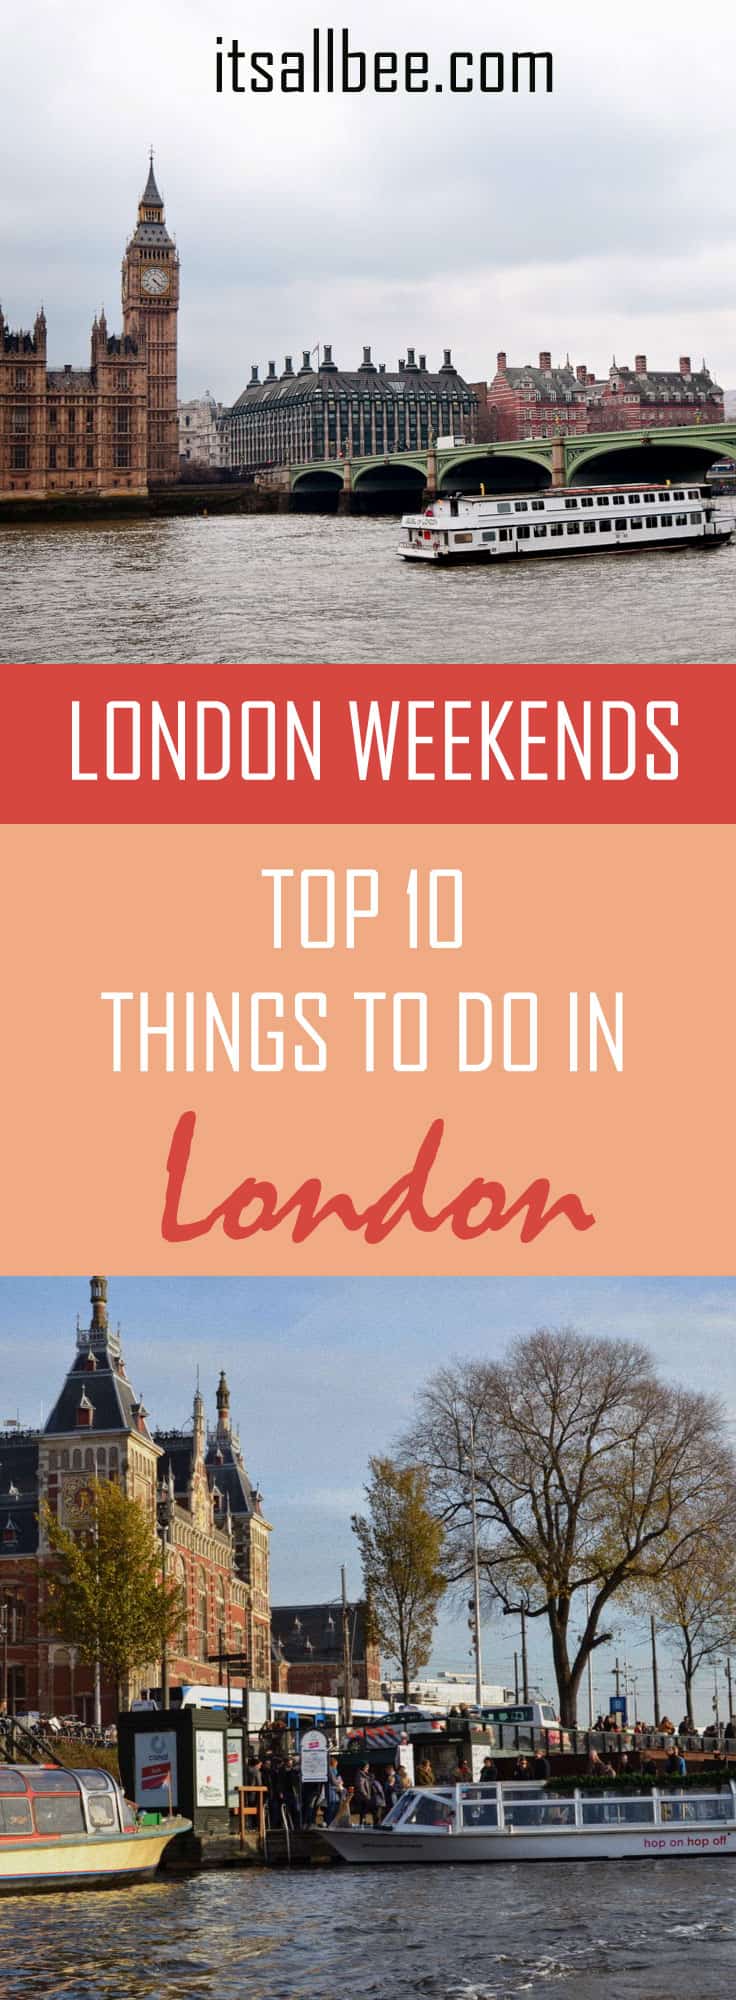 things-to-do-london